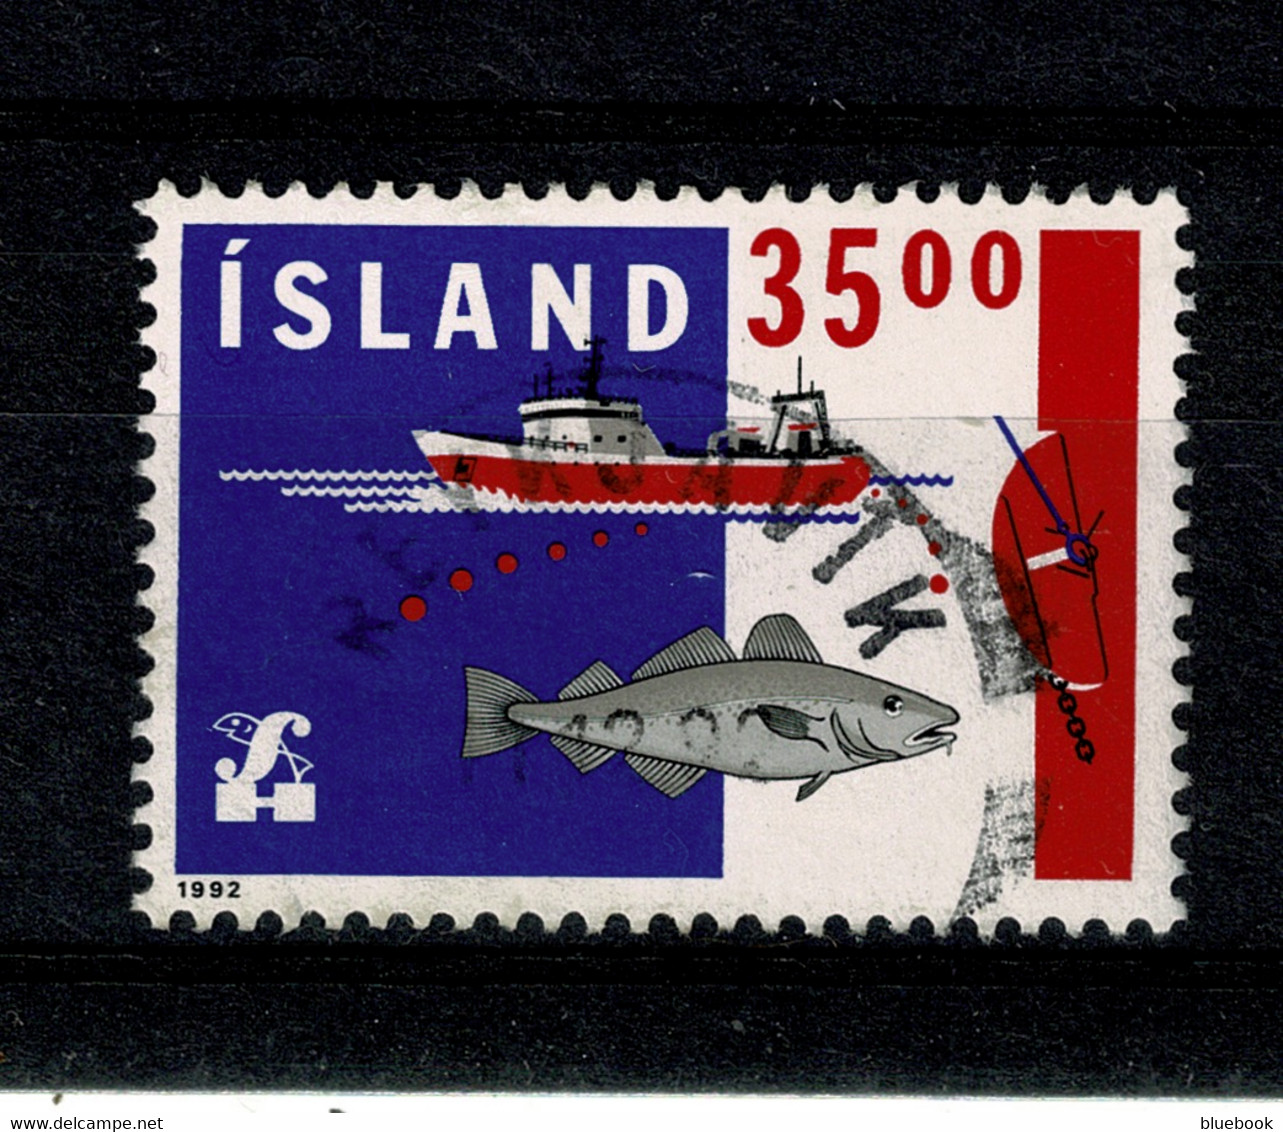 Ref 1451 - 1992 Iceland - 55k Camber Of Commerce - Trawler Ship - Used Stamp - SG 780 - Transport Theme - Usati